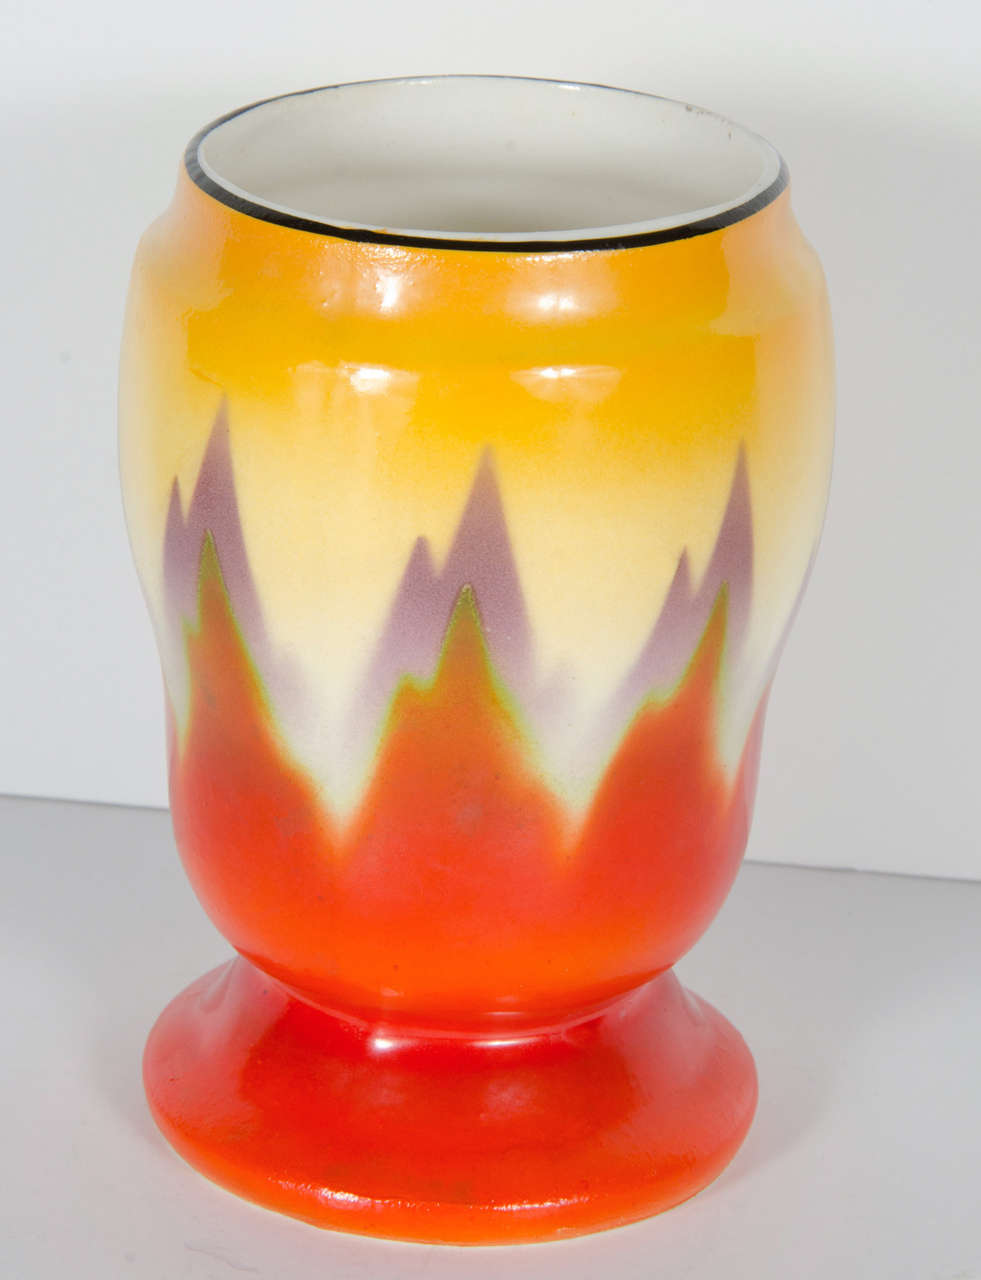 Art Deco vase by Ditmar Urbach from Czechoslovakia, Circa 1930. Hand-painted with hues of red, purple and yellow giving it it's skyscraper flame design.